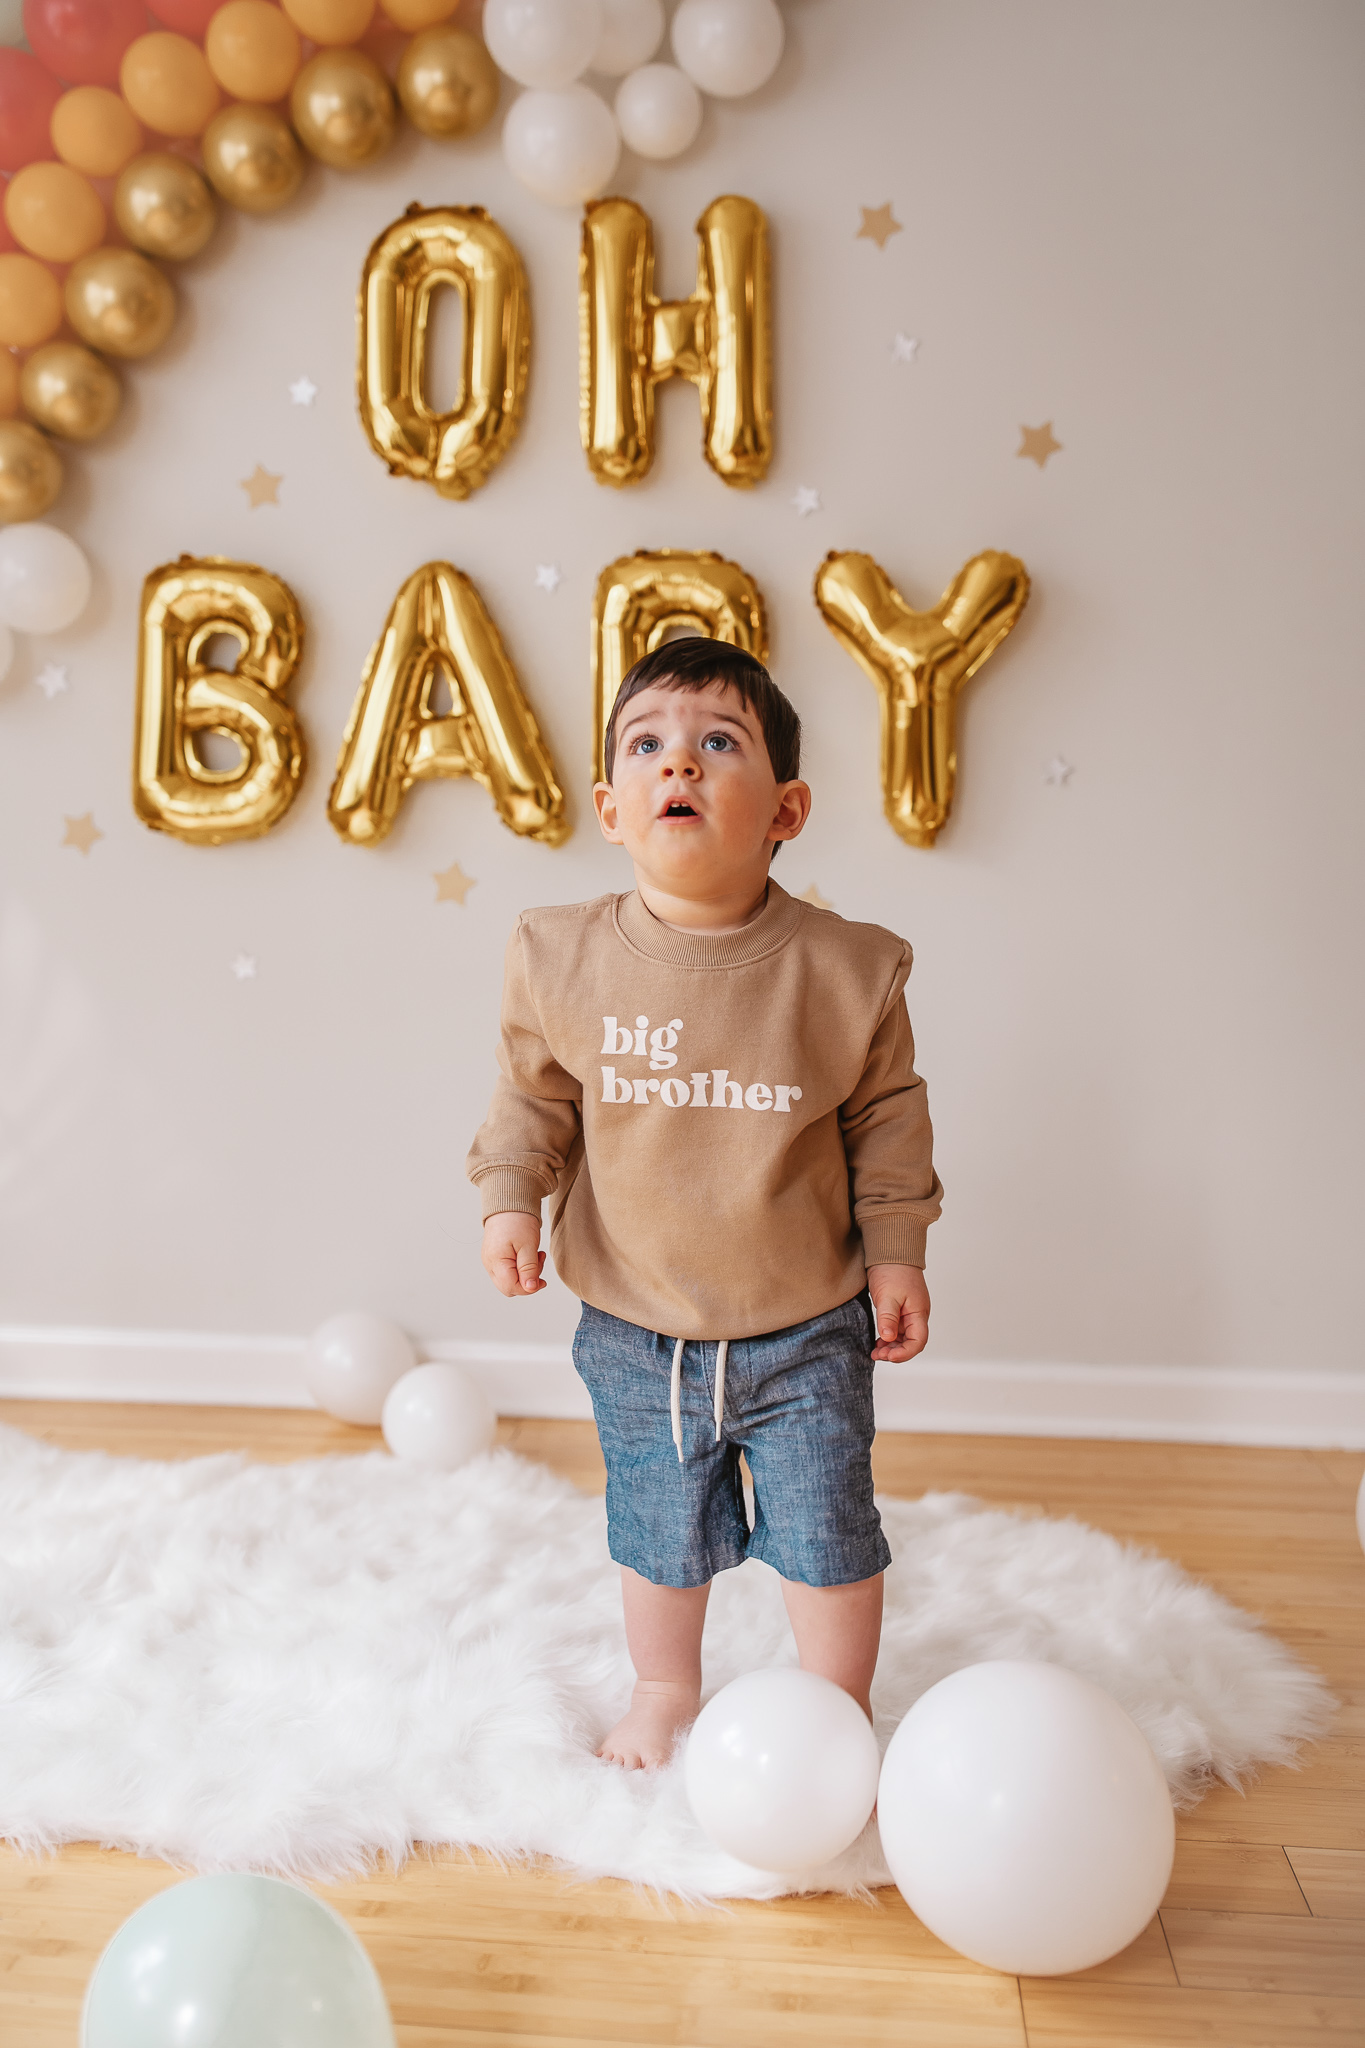 DIY Rainbow Baby Pregnancy Announcement. Big brother sweatshirt for toddlers. Rainbow baby balloon backdrop for photos.